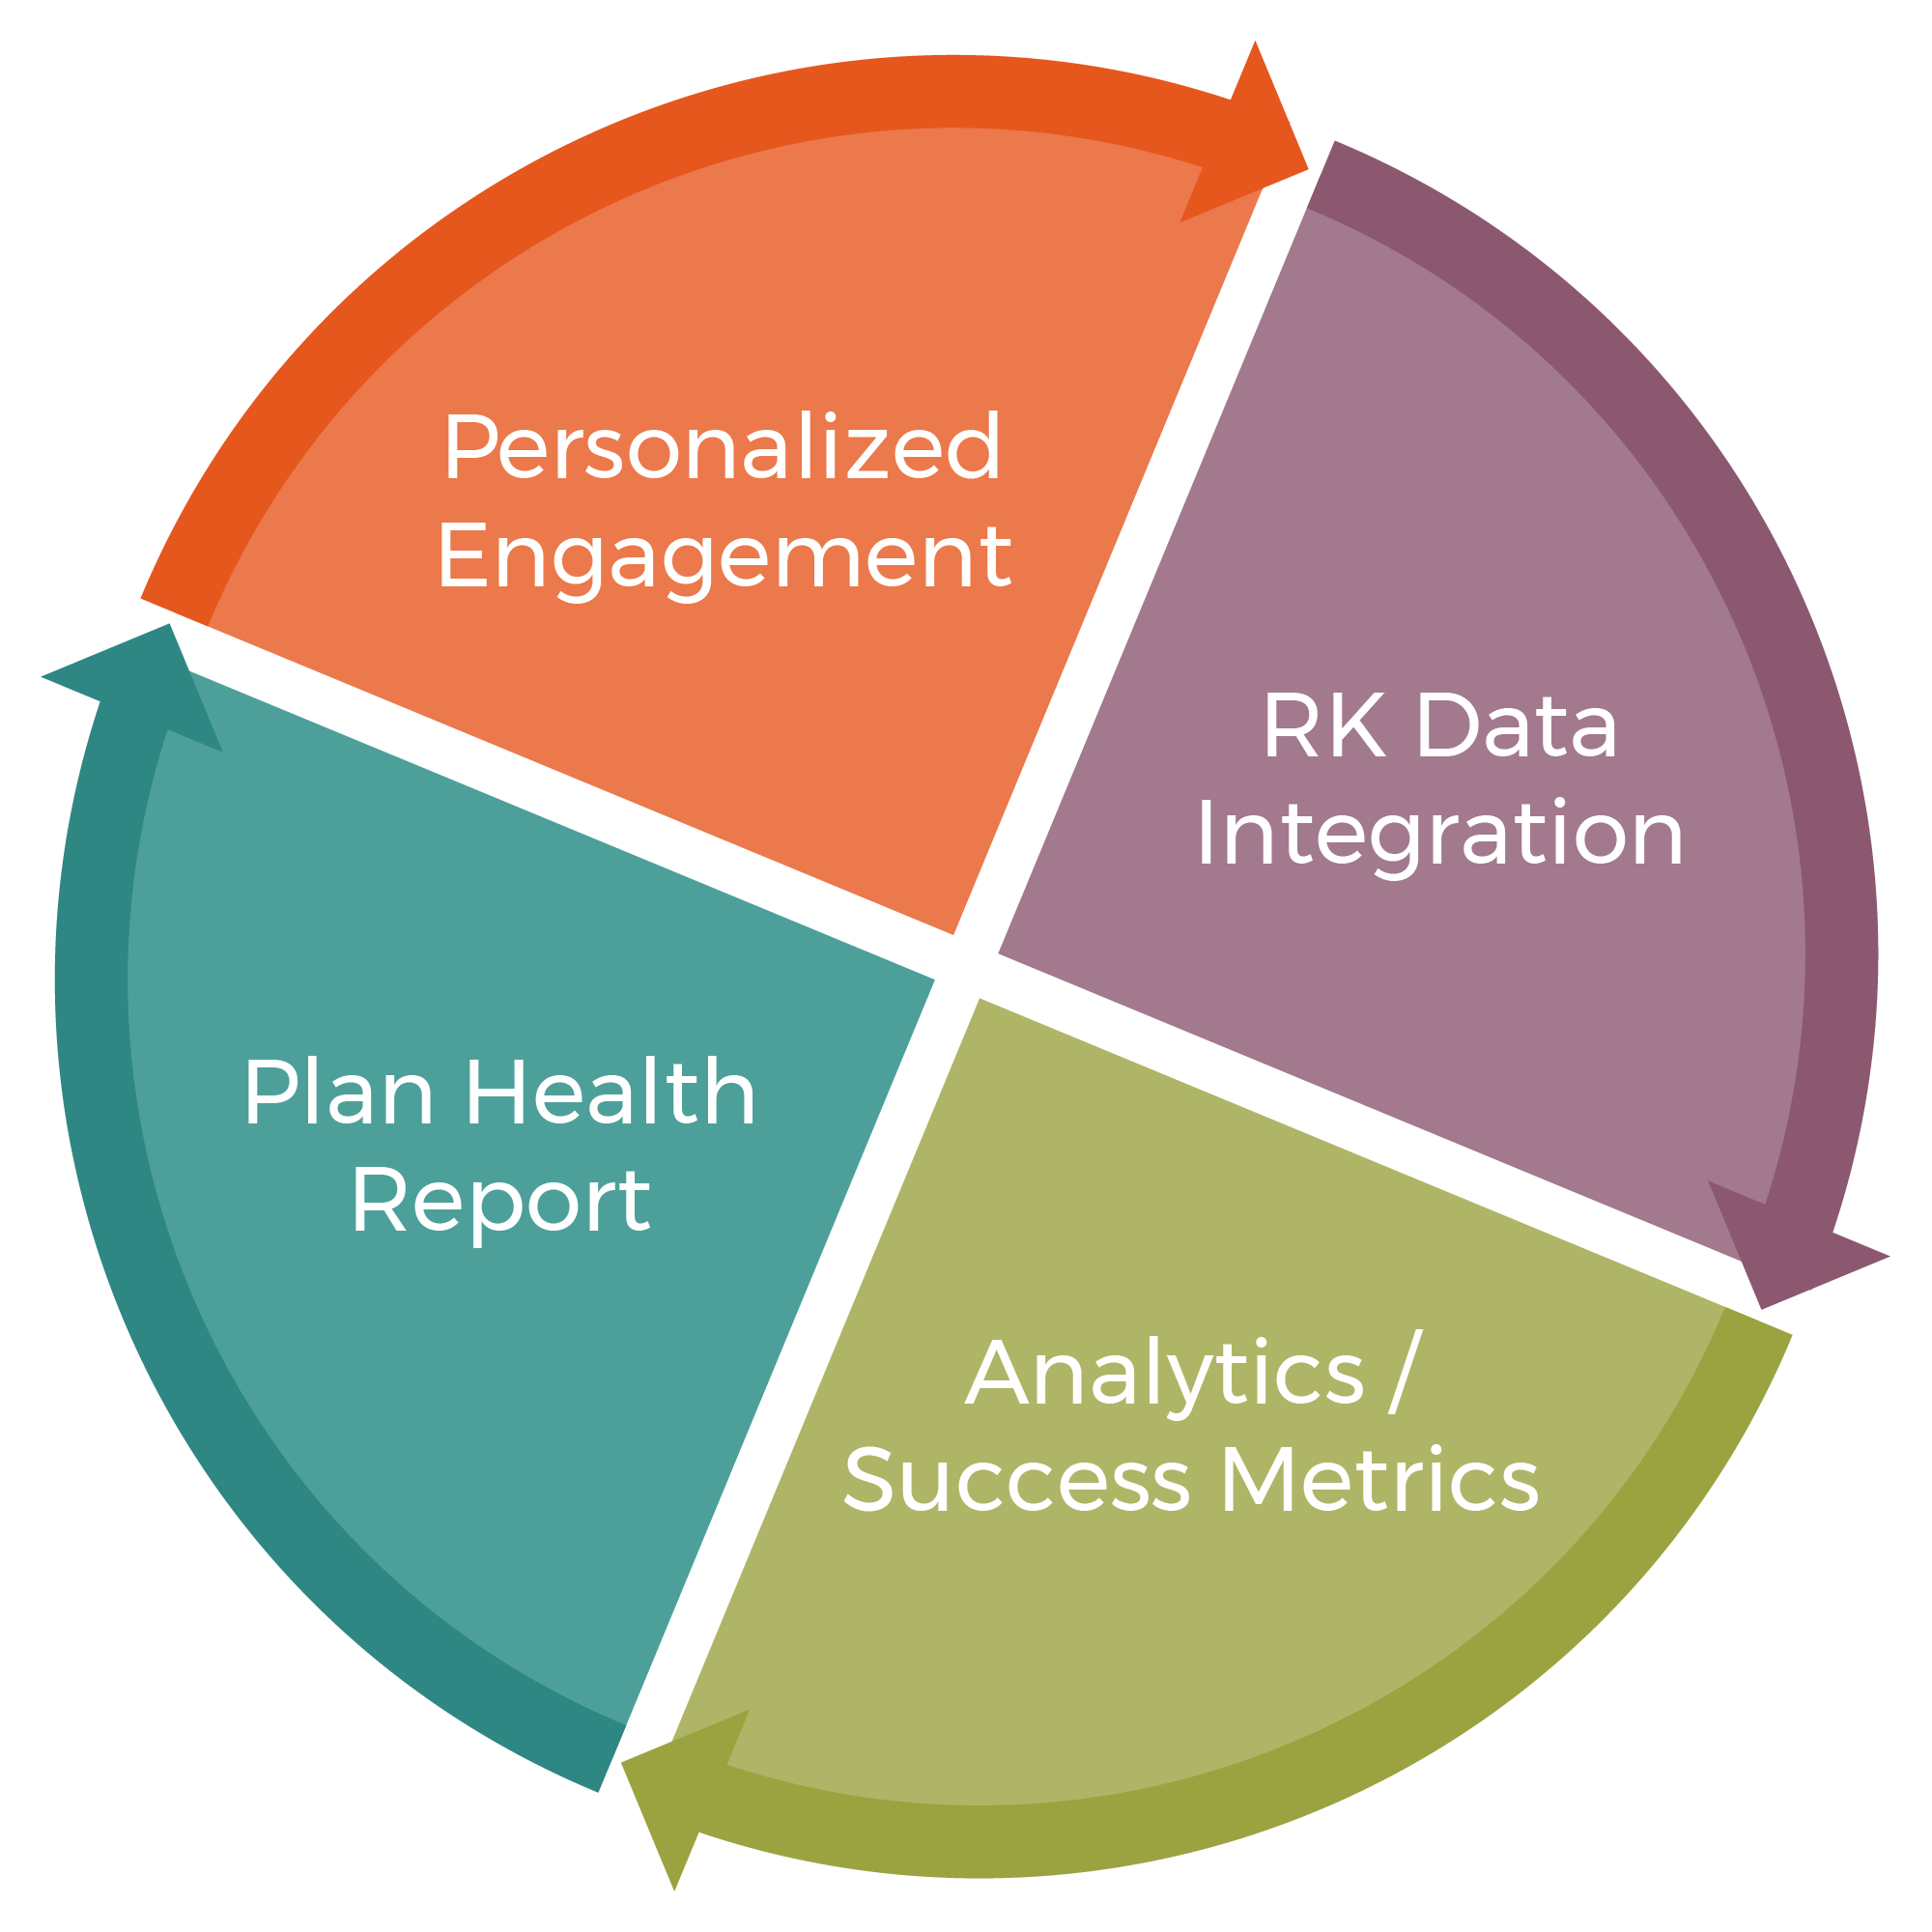 Graphic circle divided into 4 equal slices with arrows around the outer edge conveying a cycle. The 4 slices include: personalized engagement, Recordkeeper data integration, analytics and success metrics, and plan health reporting.